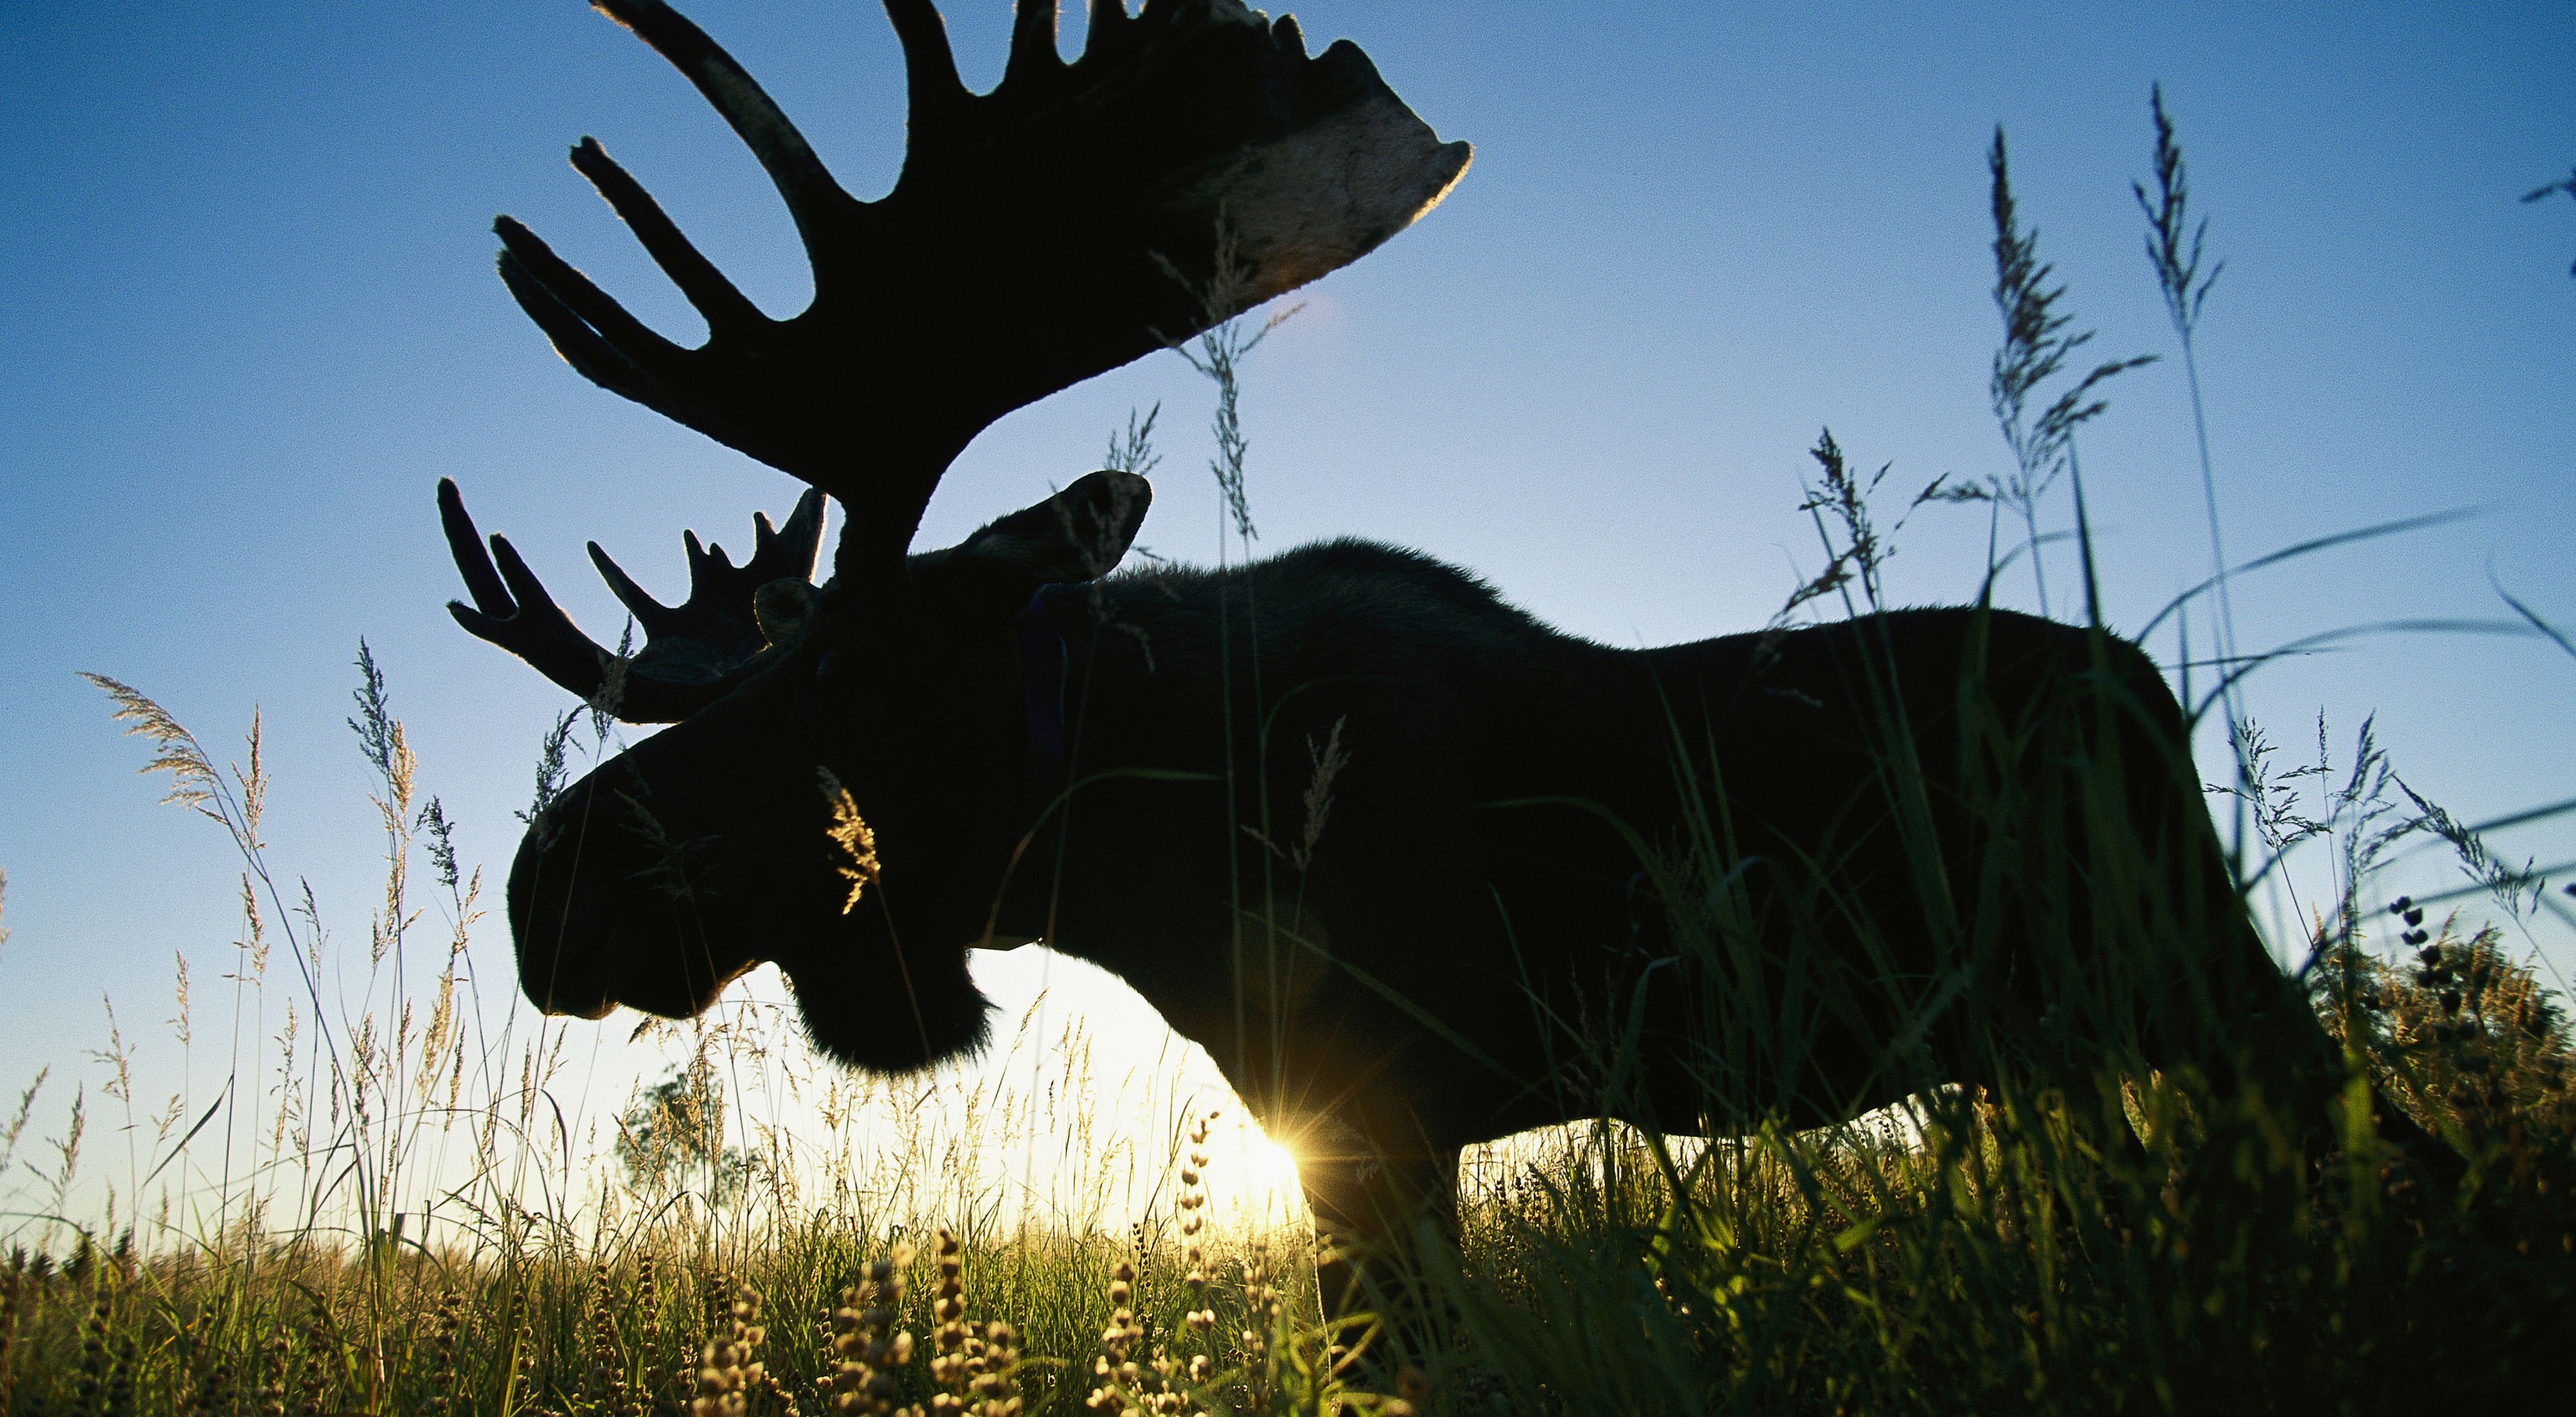 a moose backlit and photographed from below standing in the grass